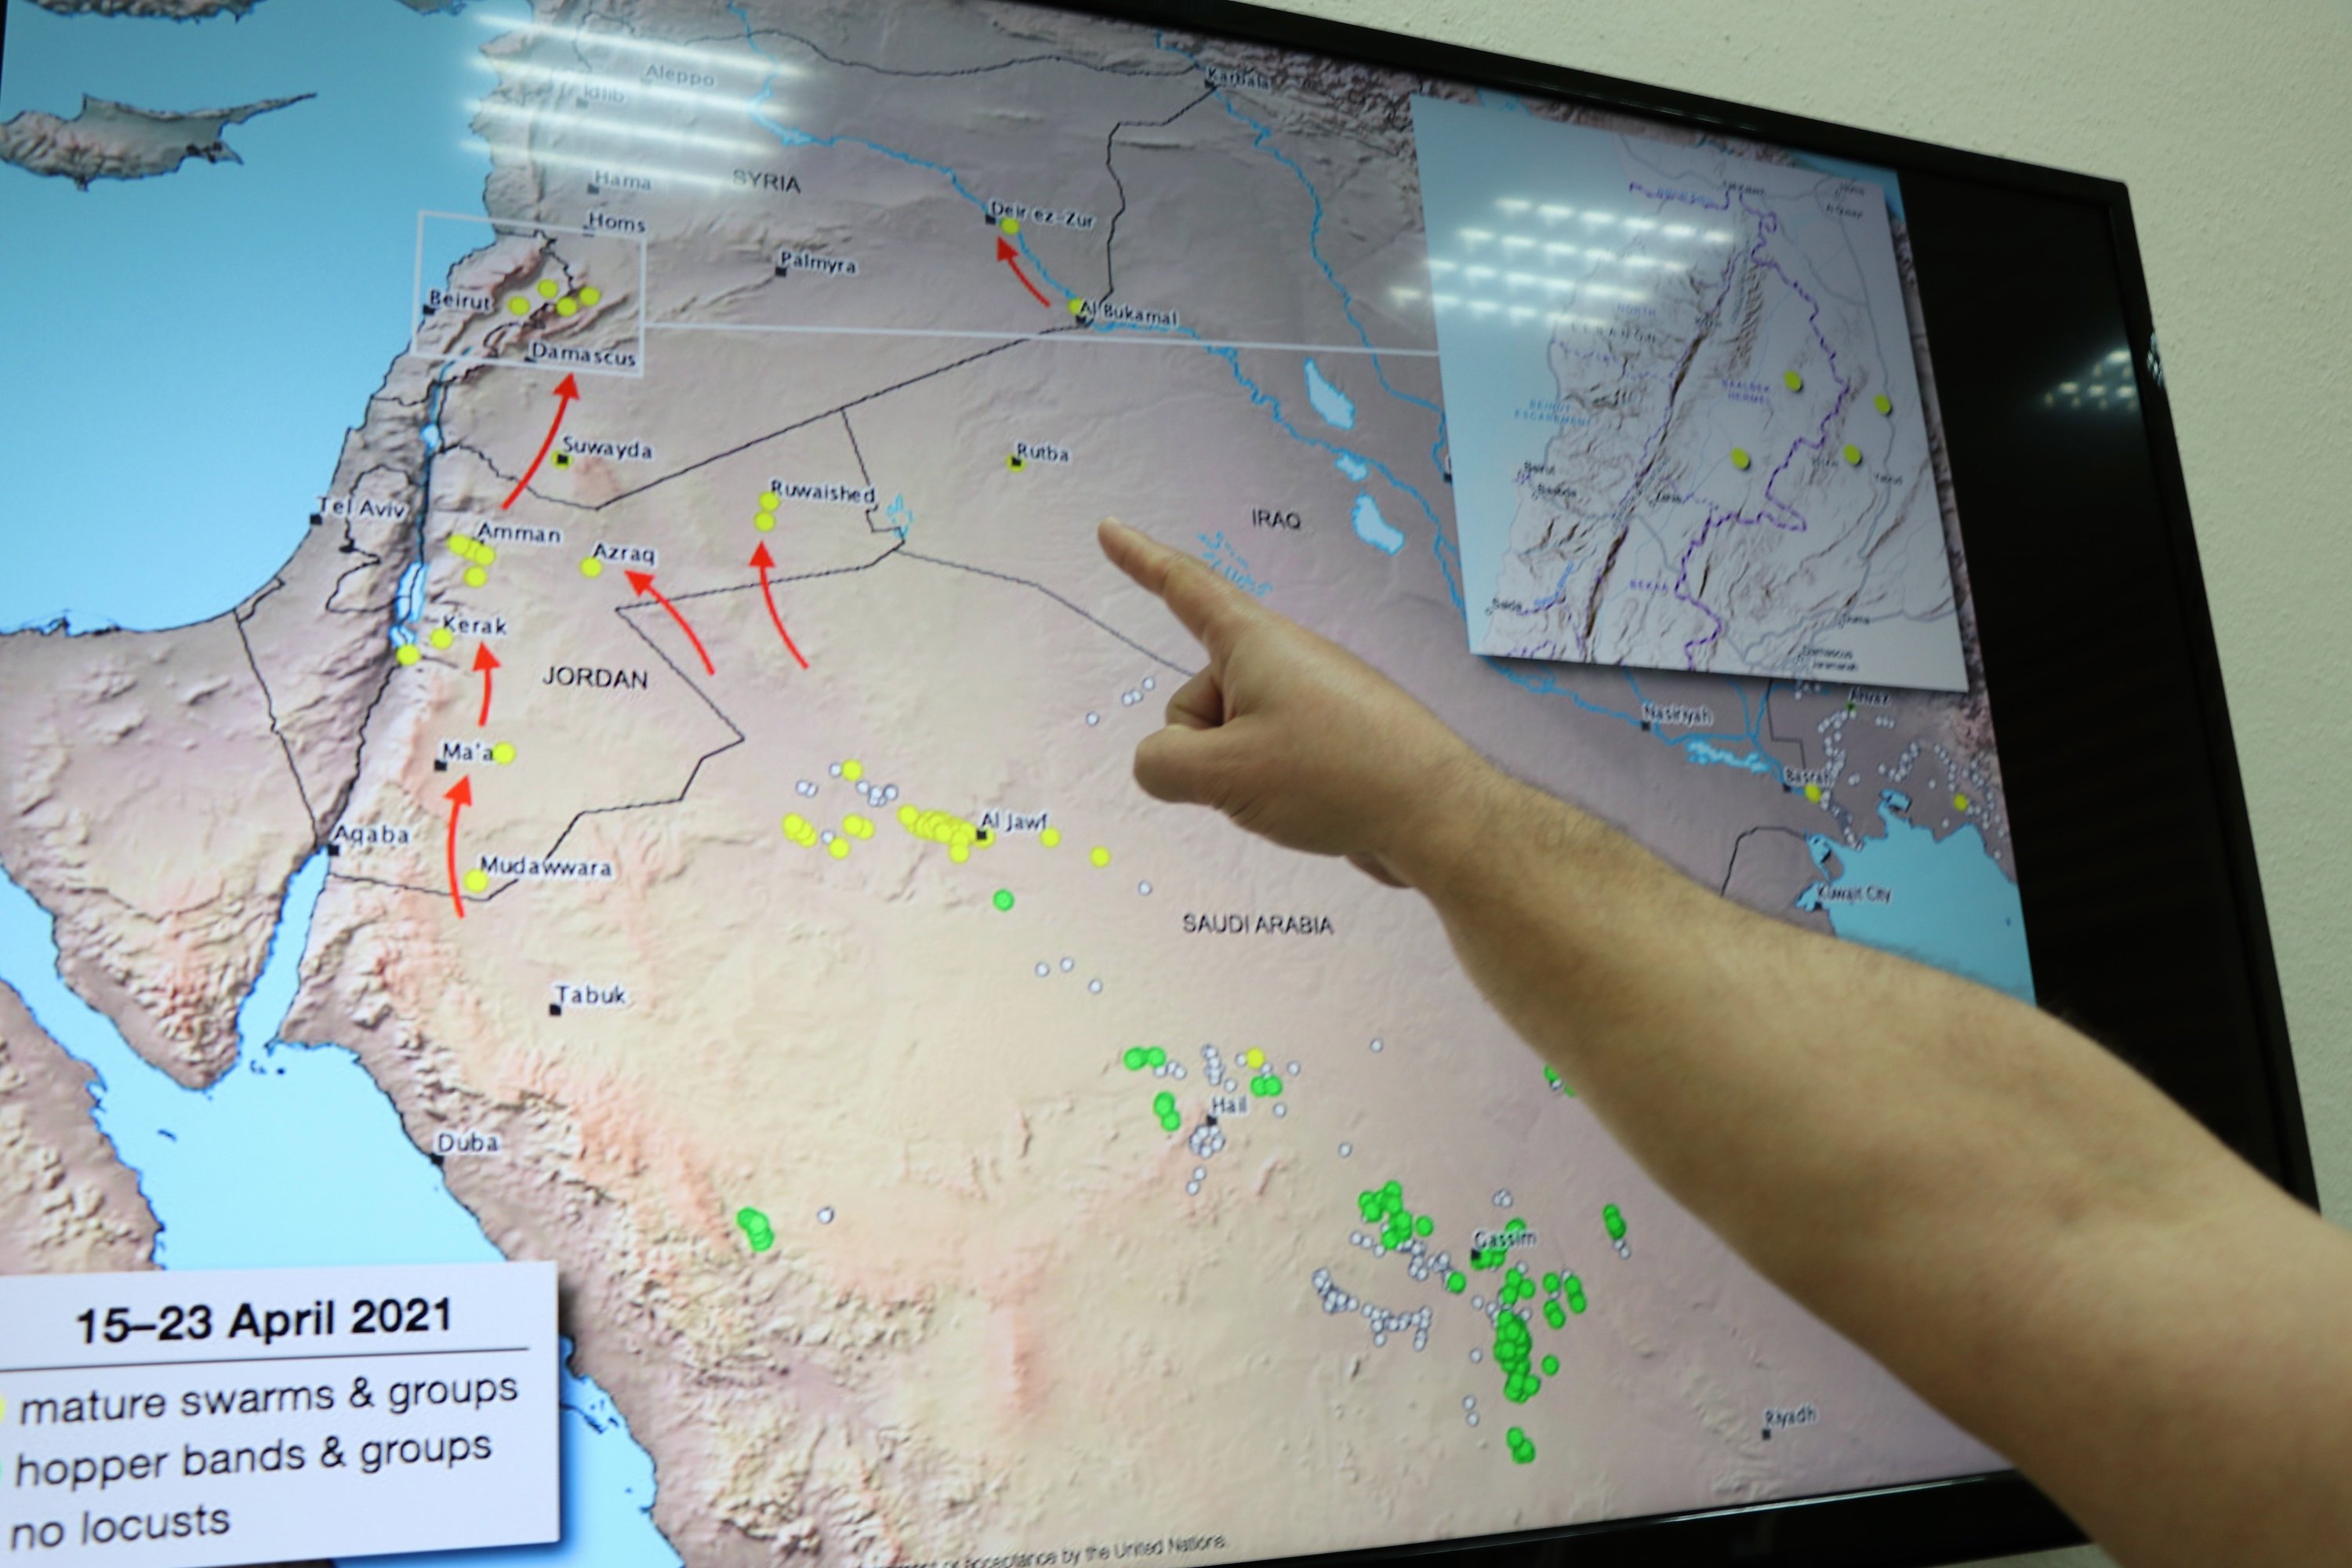 Zoology professor Ali Satar points out the route of desert locusts, in Diyarbakır, Turkey, April 30, 2021. (DHA Photo)